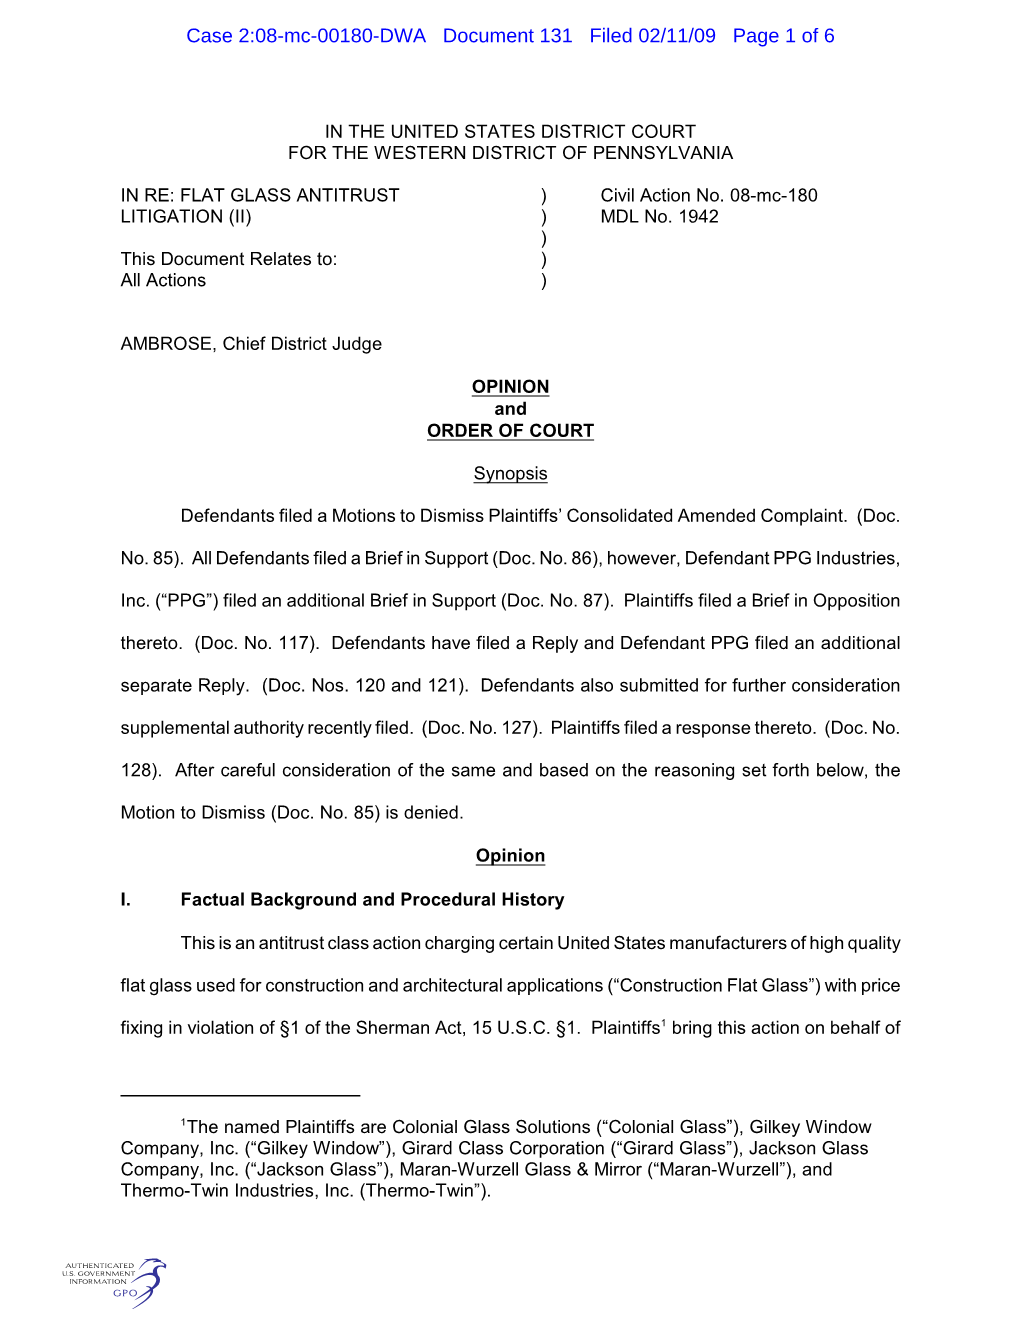 Case 2:08-Mc-00180-DWA Document 131 Filed 02/11/09 Page 1 of 6